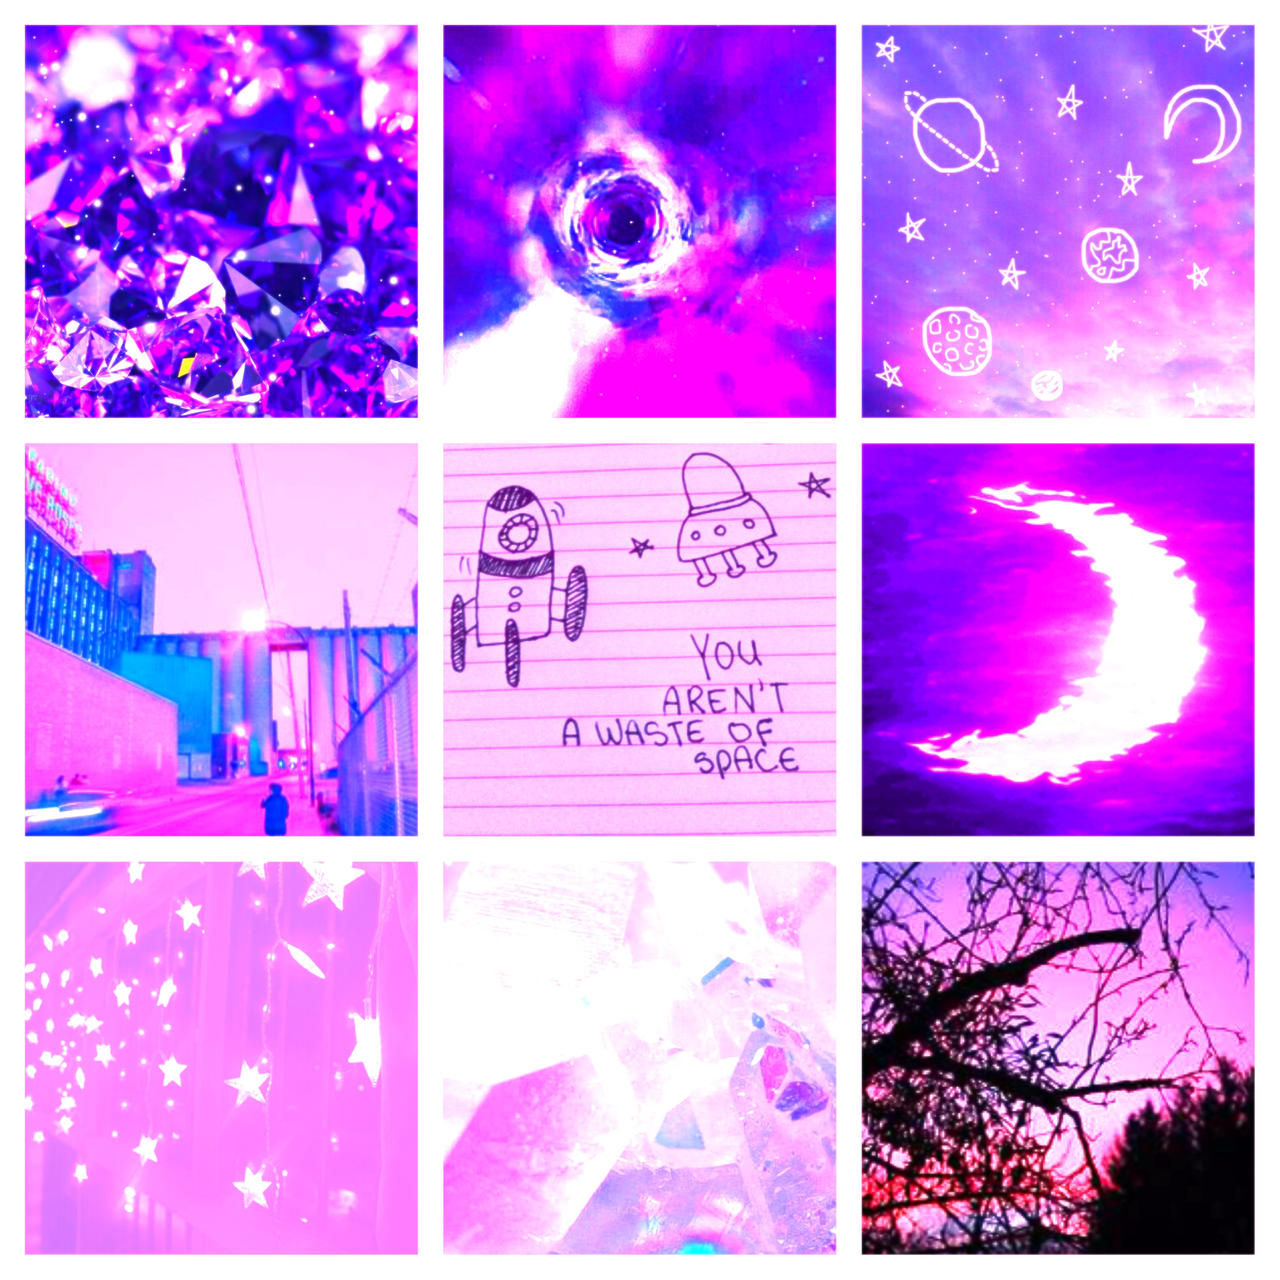 Galaxy aesthetic moodboard by PookyForEver on DeviantArt